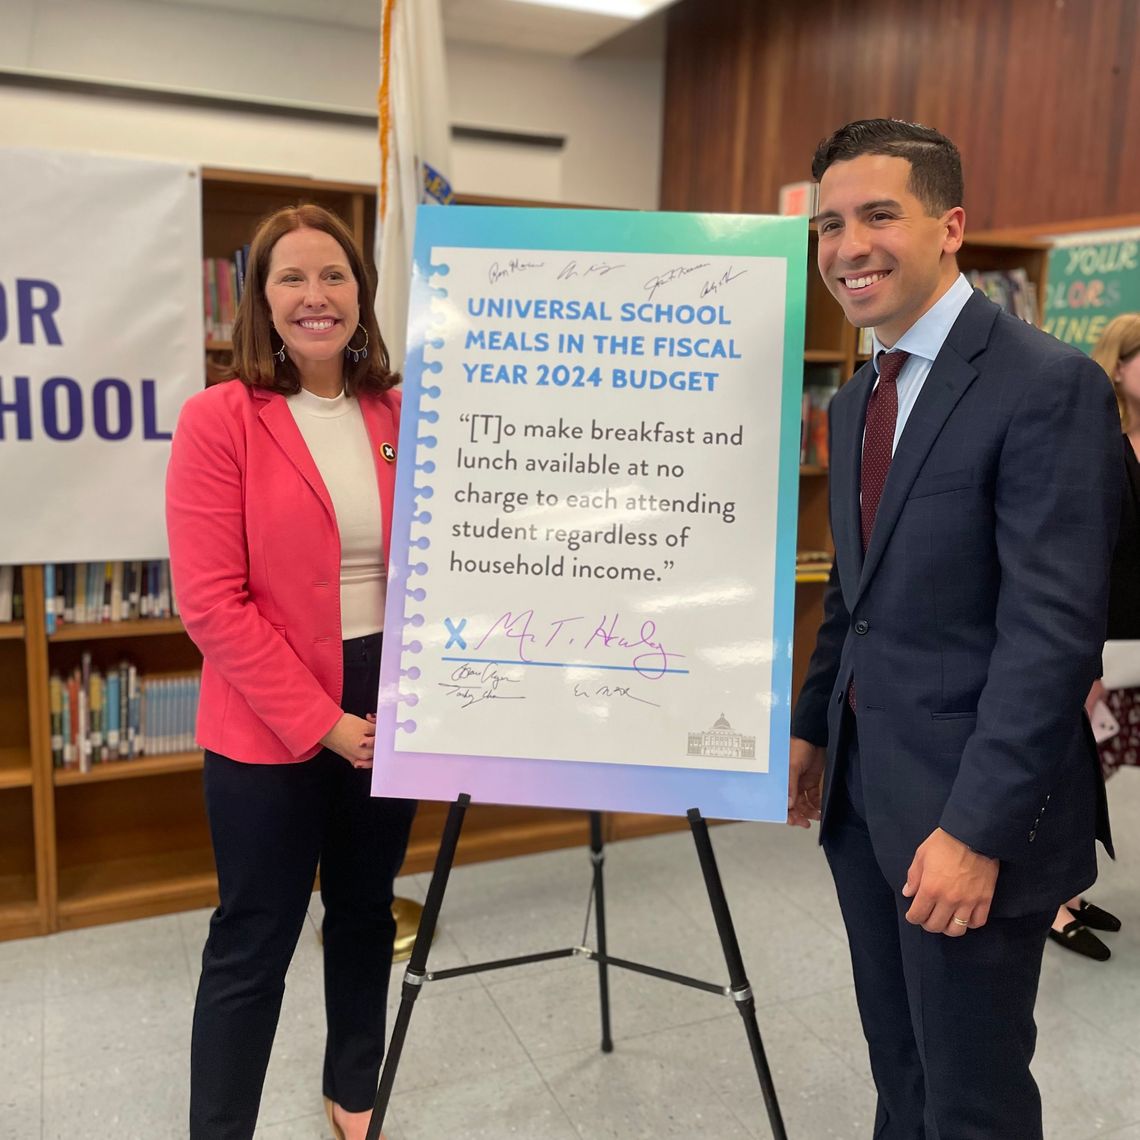 Erin McAleer, President and CEO of Project Bread stands along with Representative Andres X. Vargas, next to a large poster advertising Universal Free School Meals featuring Governor Maura Healey's signature